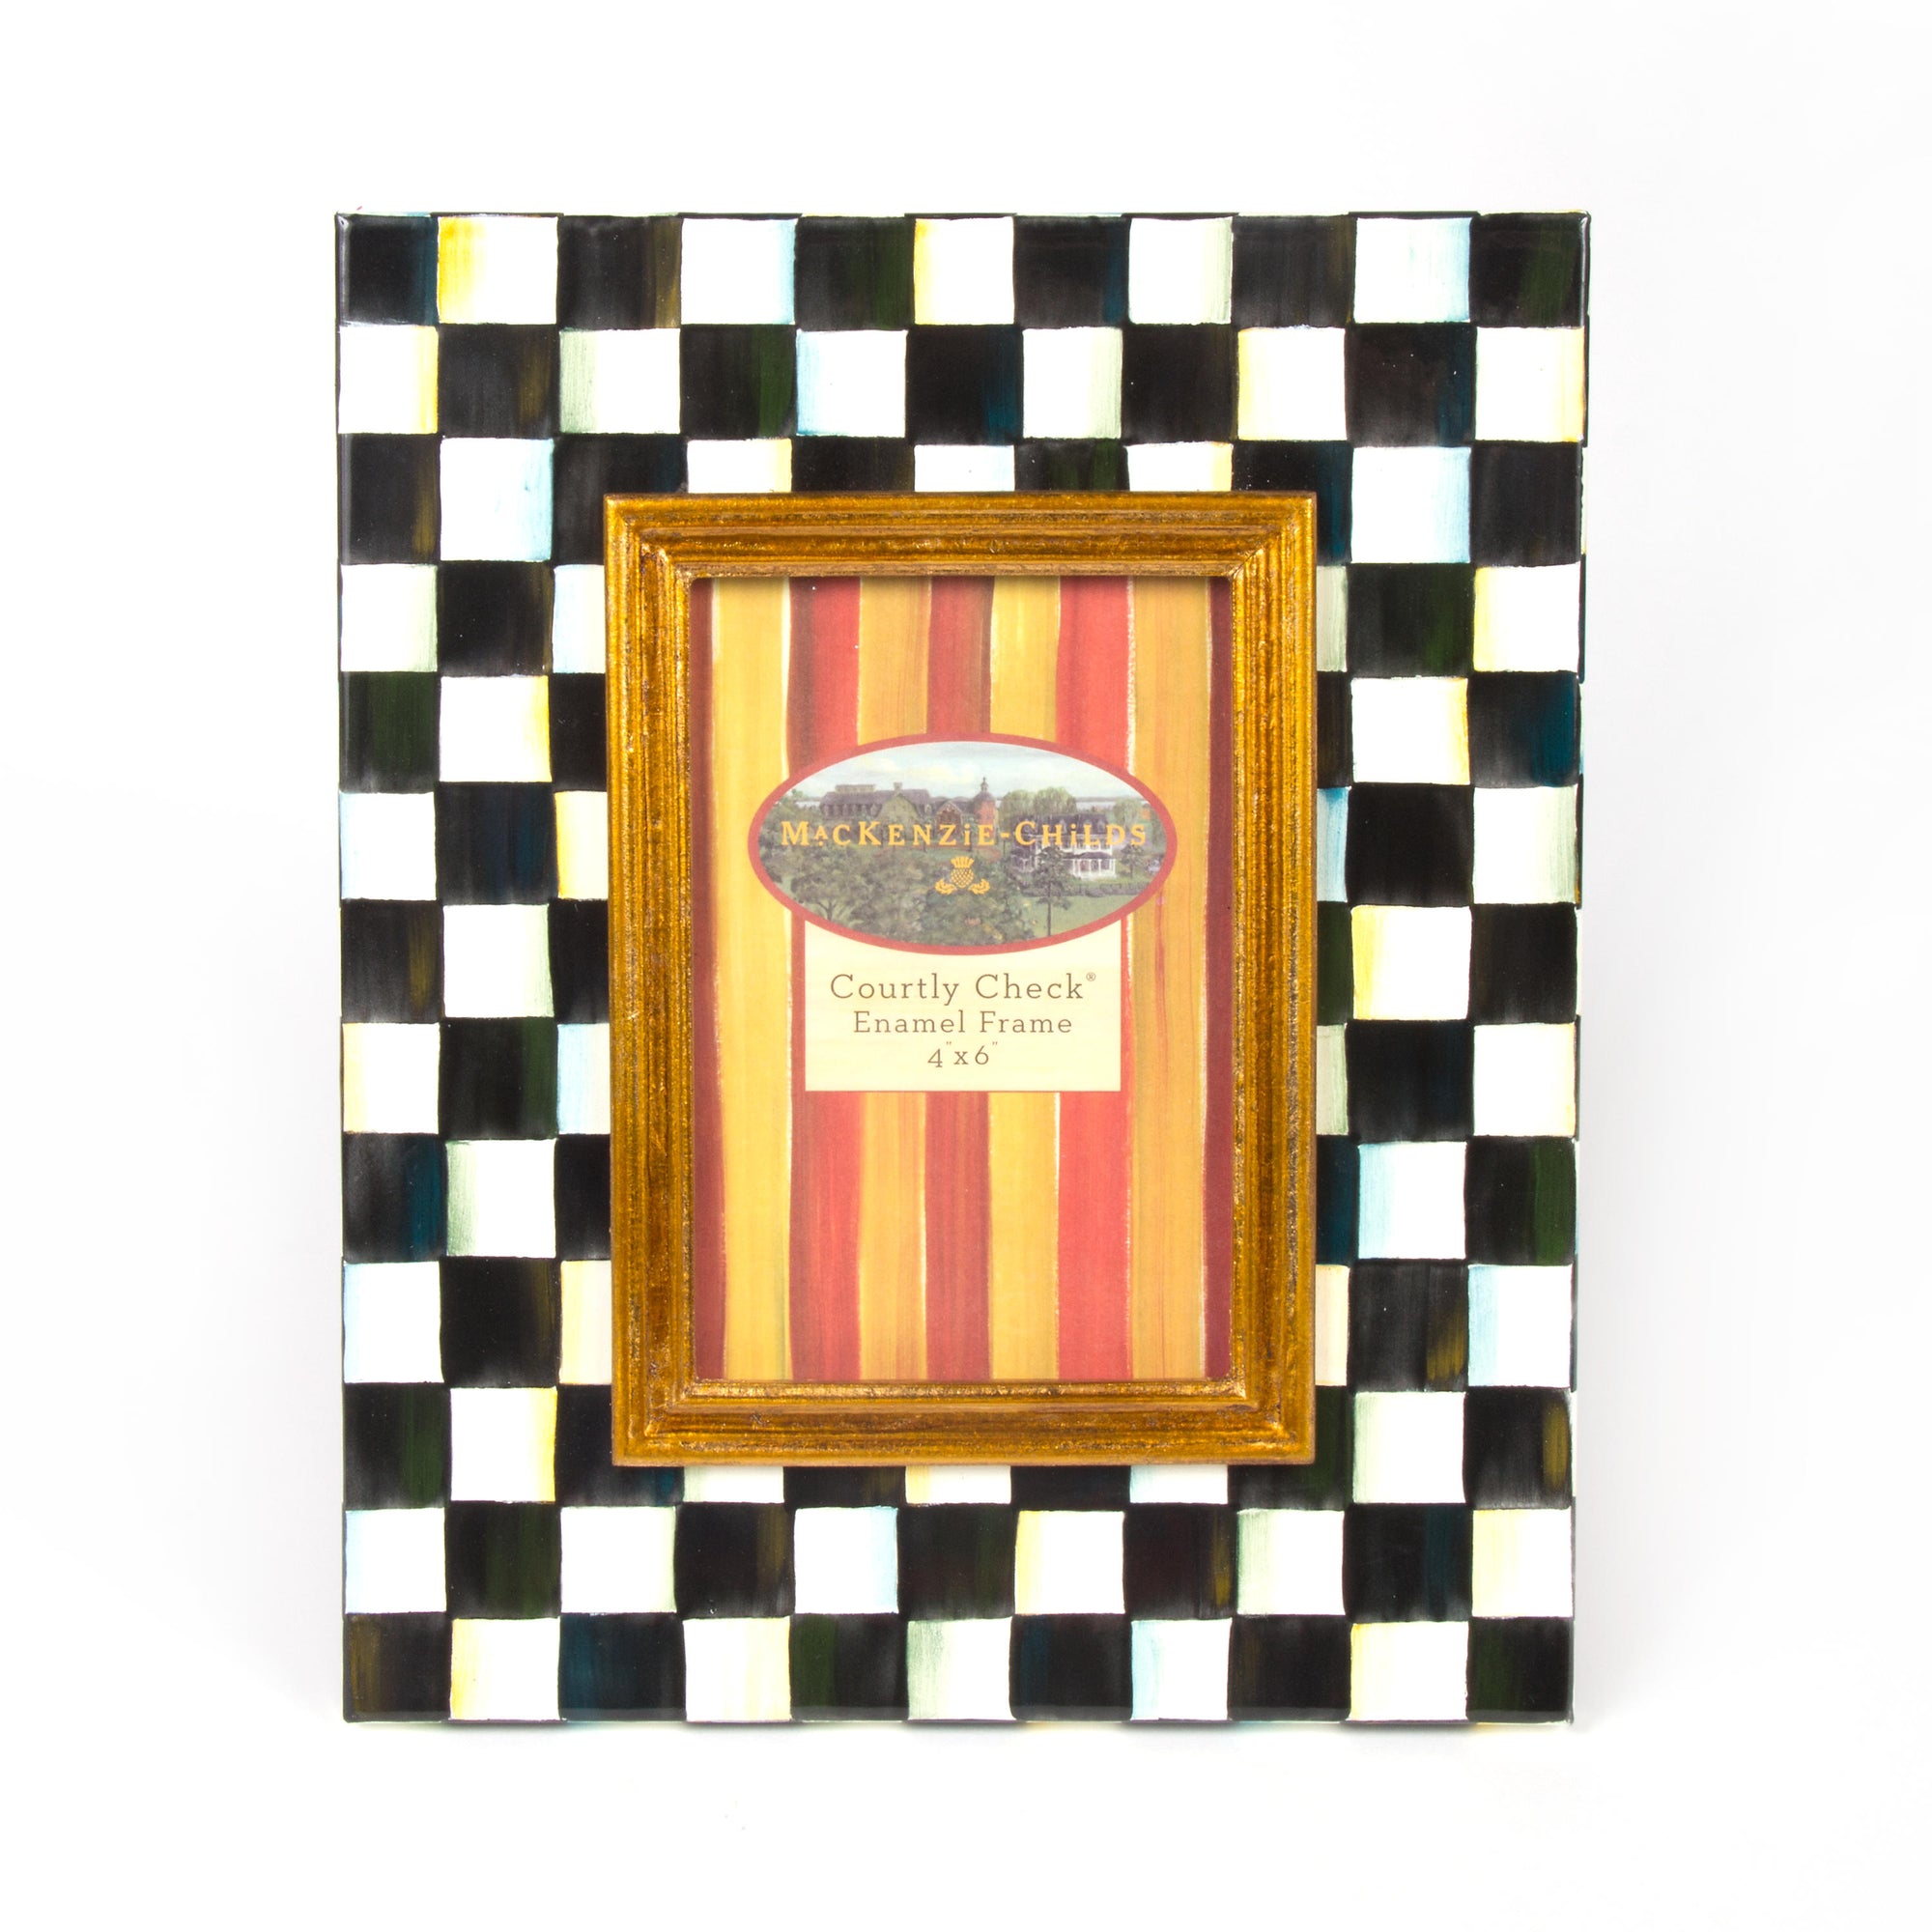 Courtly Check Enamel Frame - 4" x 6"